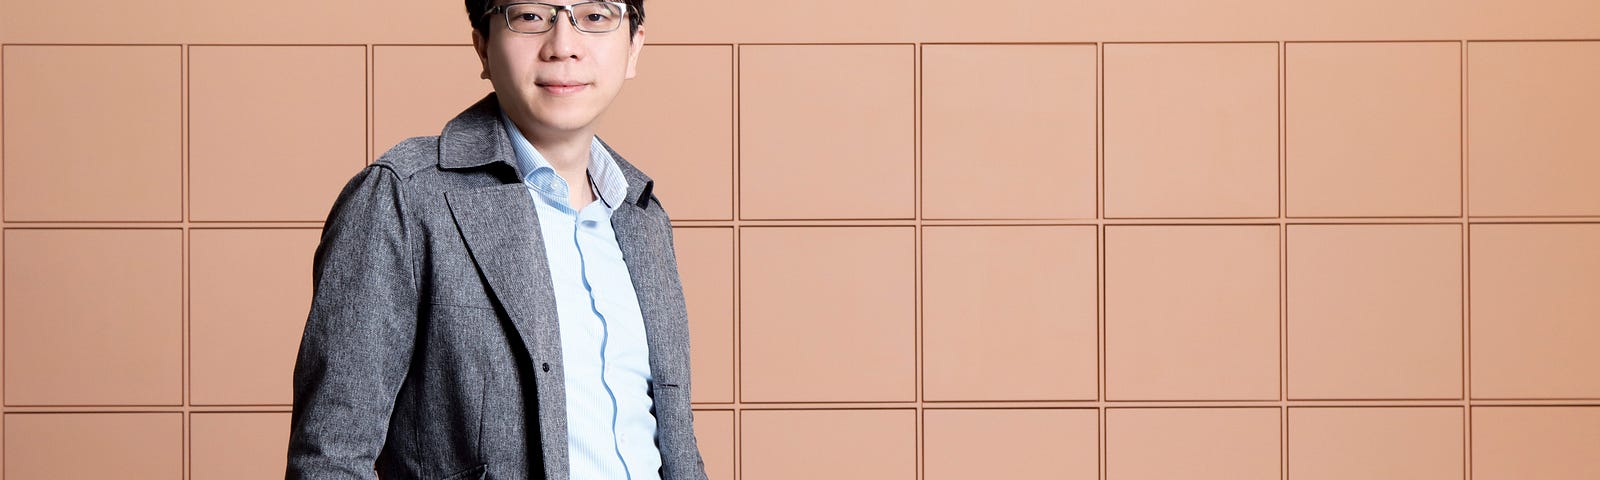 Dr Tommy Lam Tsan-yuk  from the University of Hong Kong stands in front of a nude squared wall.